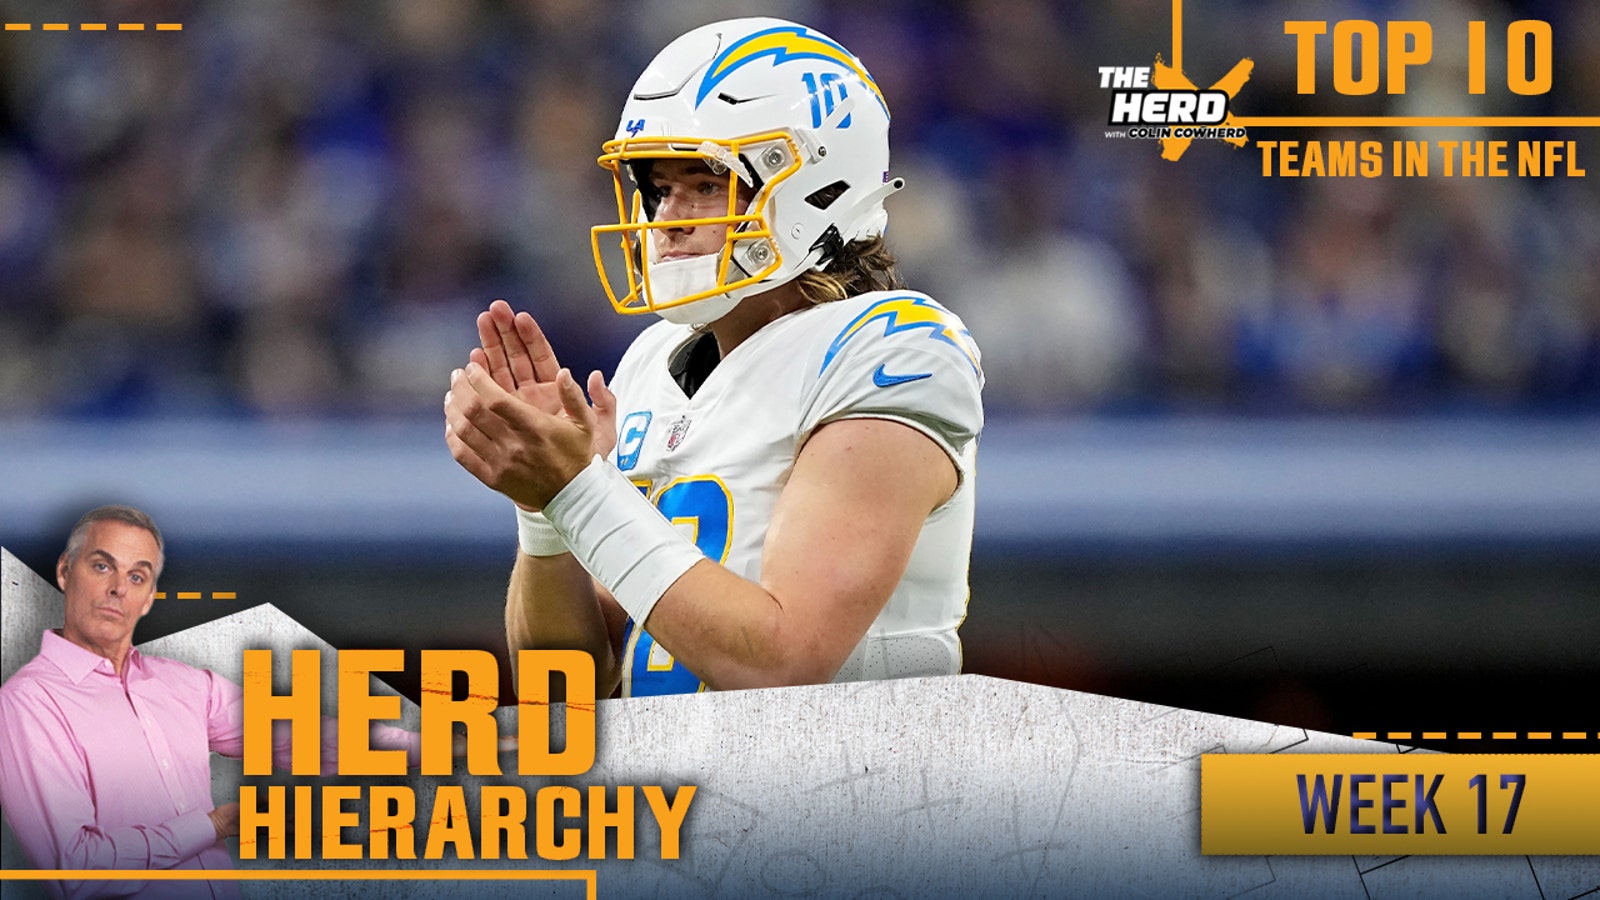 Hierarchy of the Herd: Playoff Chargers and Packers Jump in Colin's Week 17 Top 10